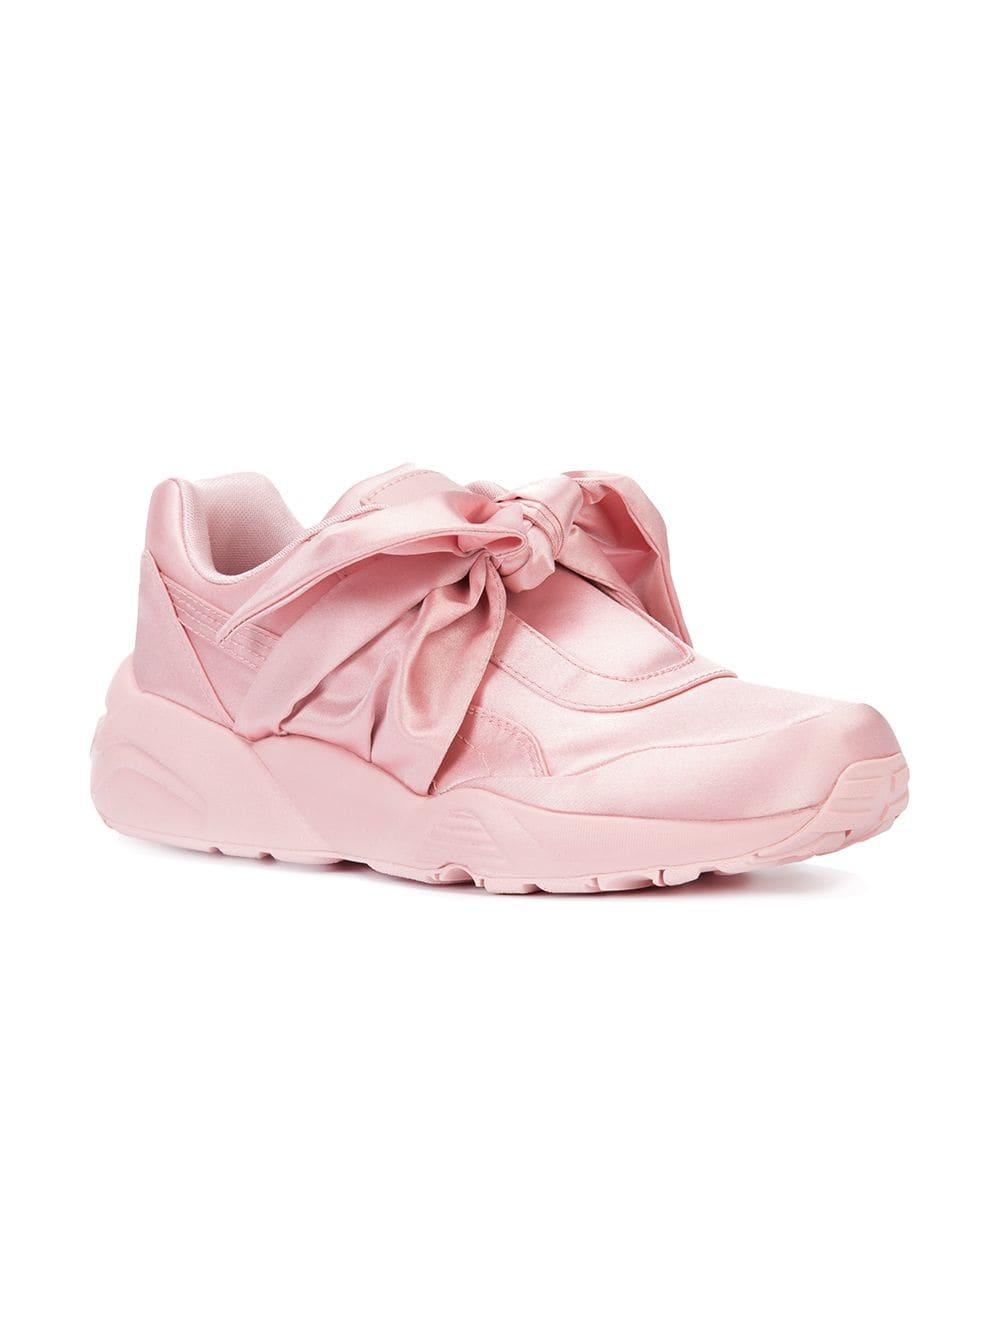 PUMA Bow Sneakers in Pink - Lyst